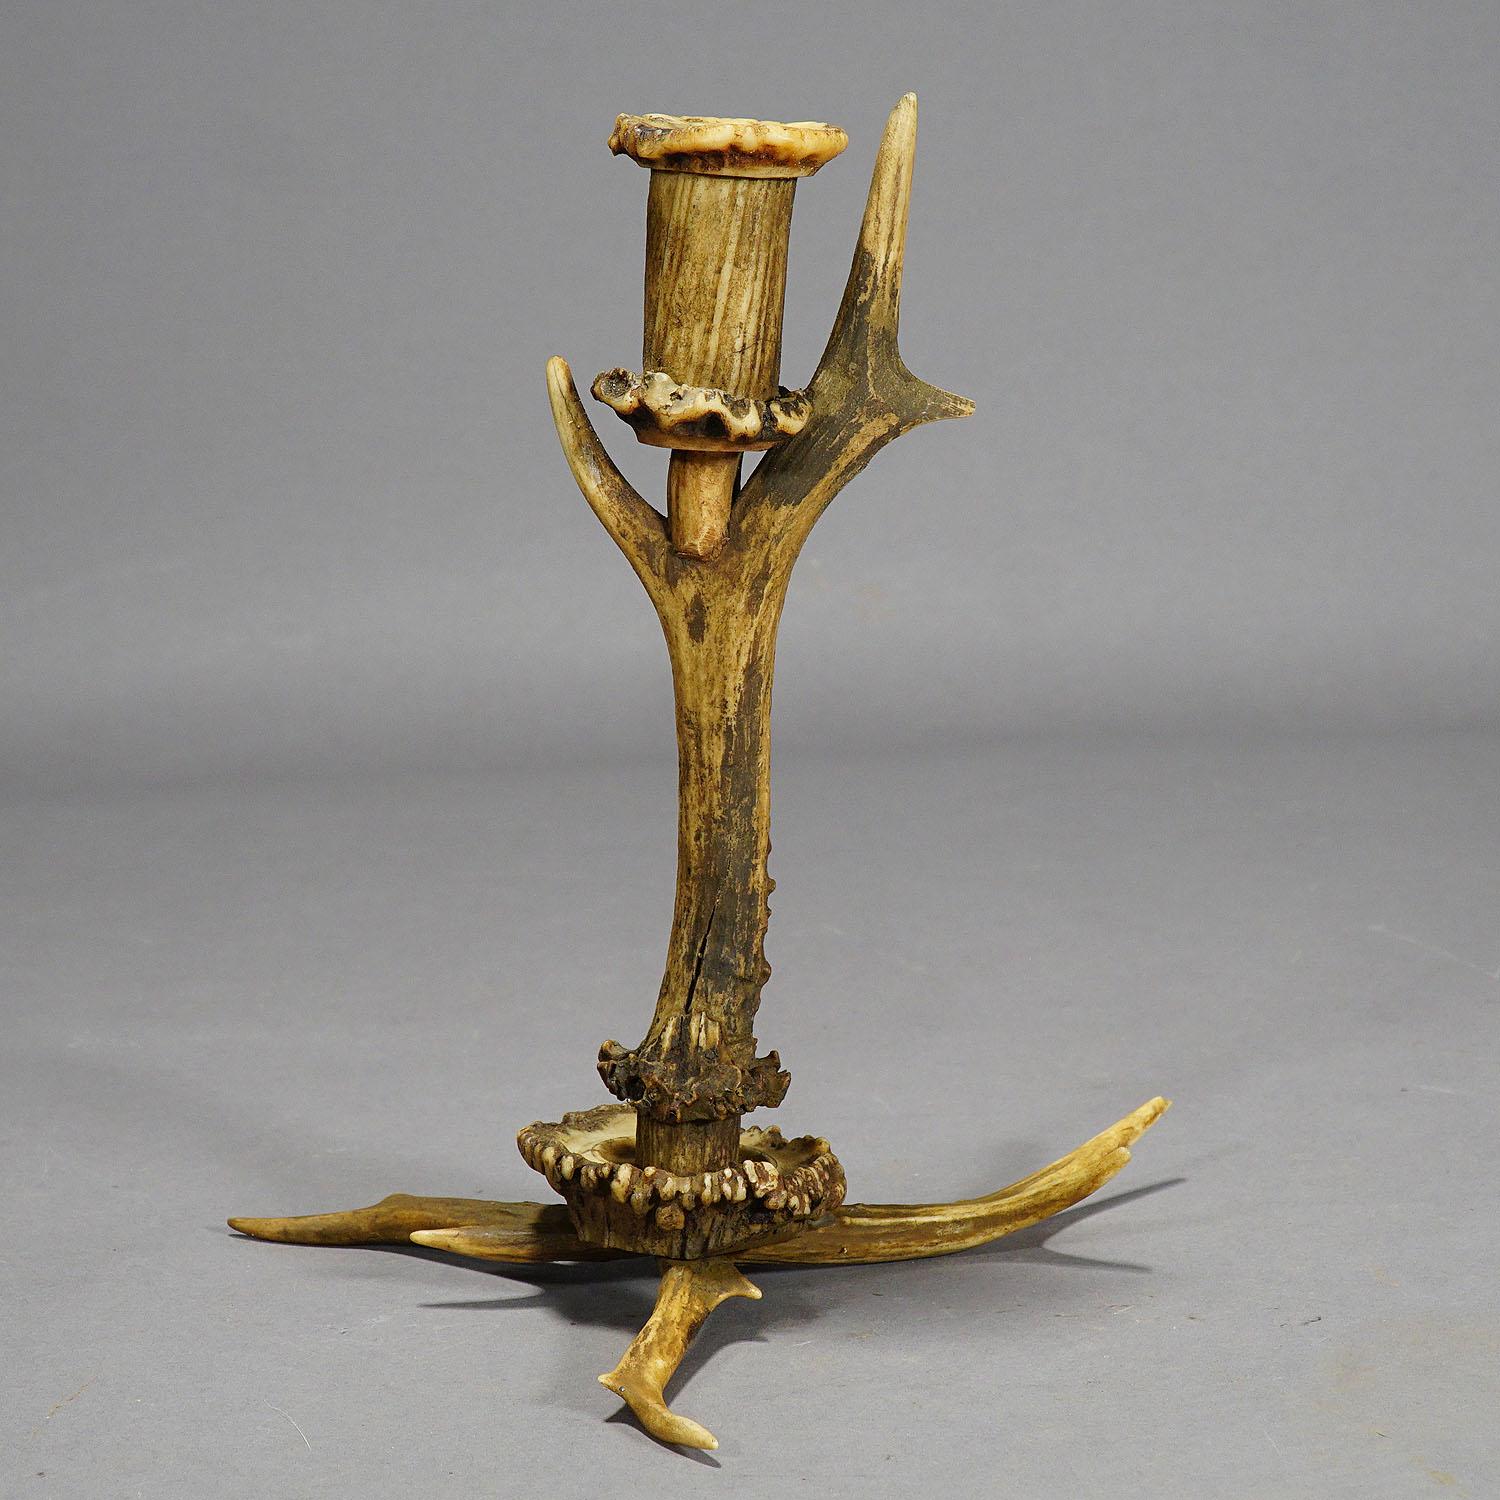 Stylish Cabin Decor Antler Candlestick, Germany, circa 1900

A fashionable rustic candle holder, made of antlers from the deer. The spout is made of turned antler pieces. Executed in Germany ca. 1900.
Measures: 
Height 9.84